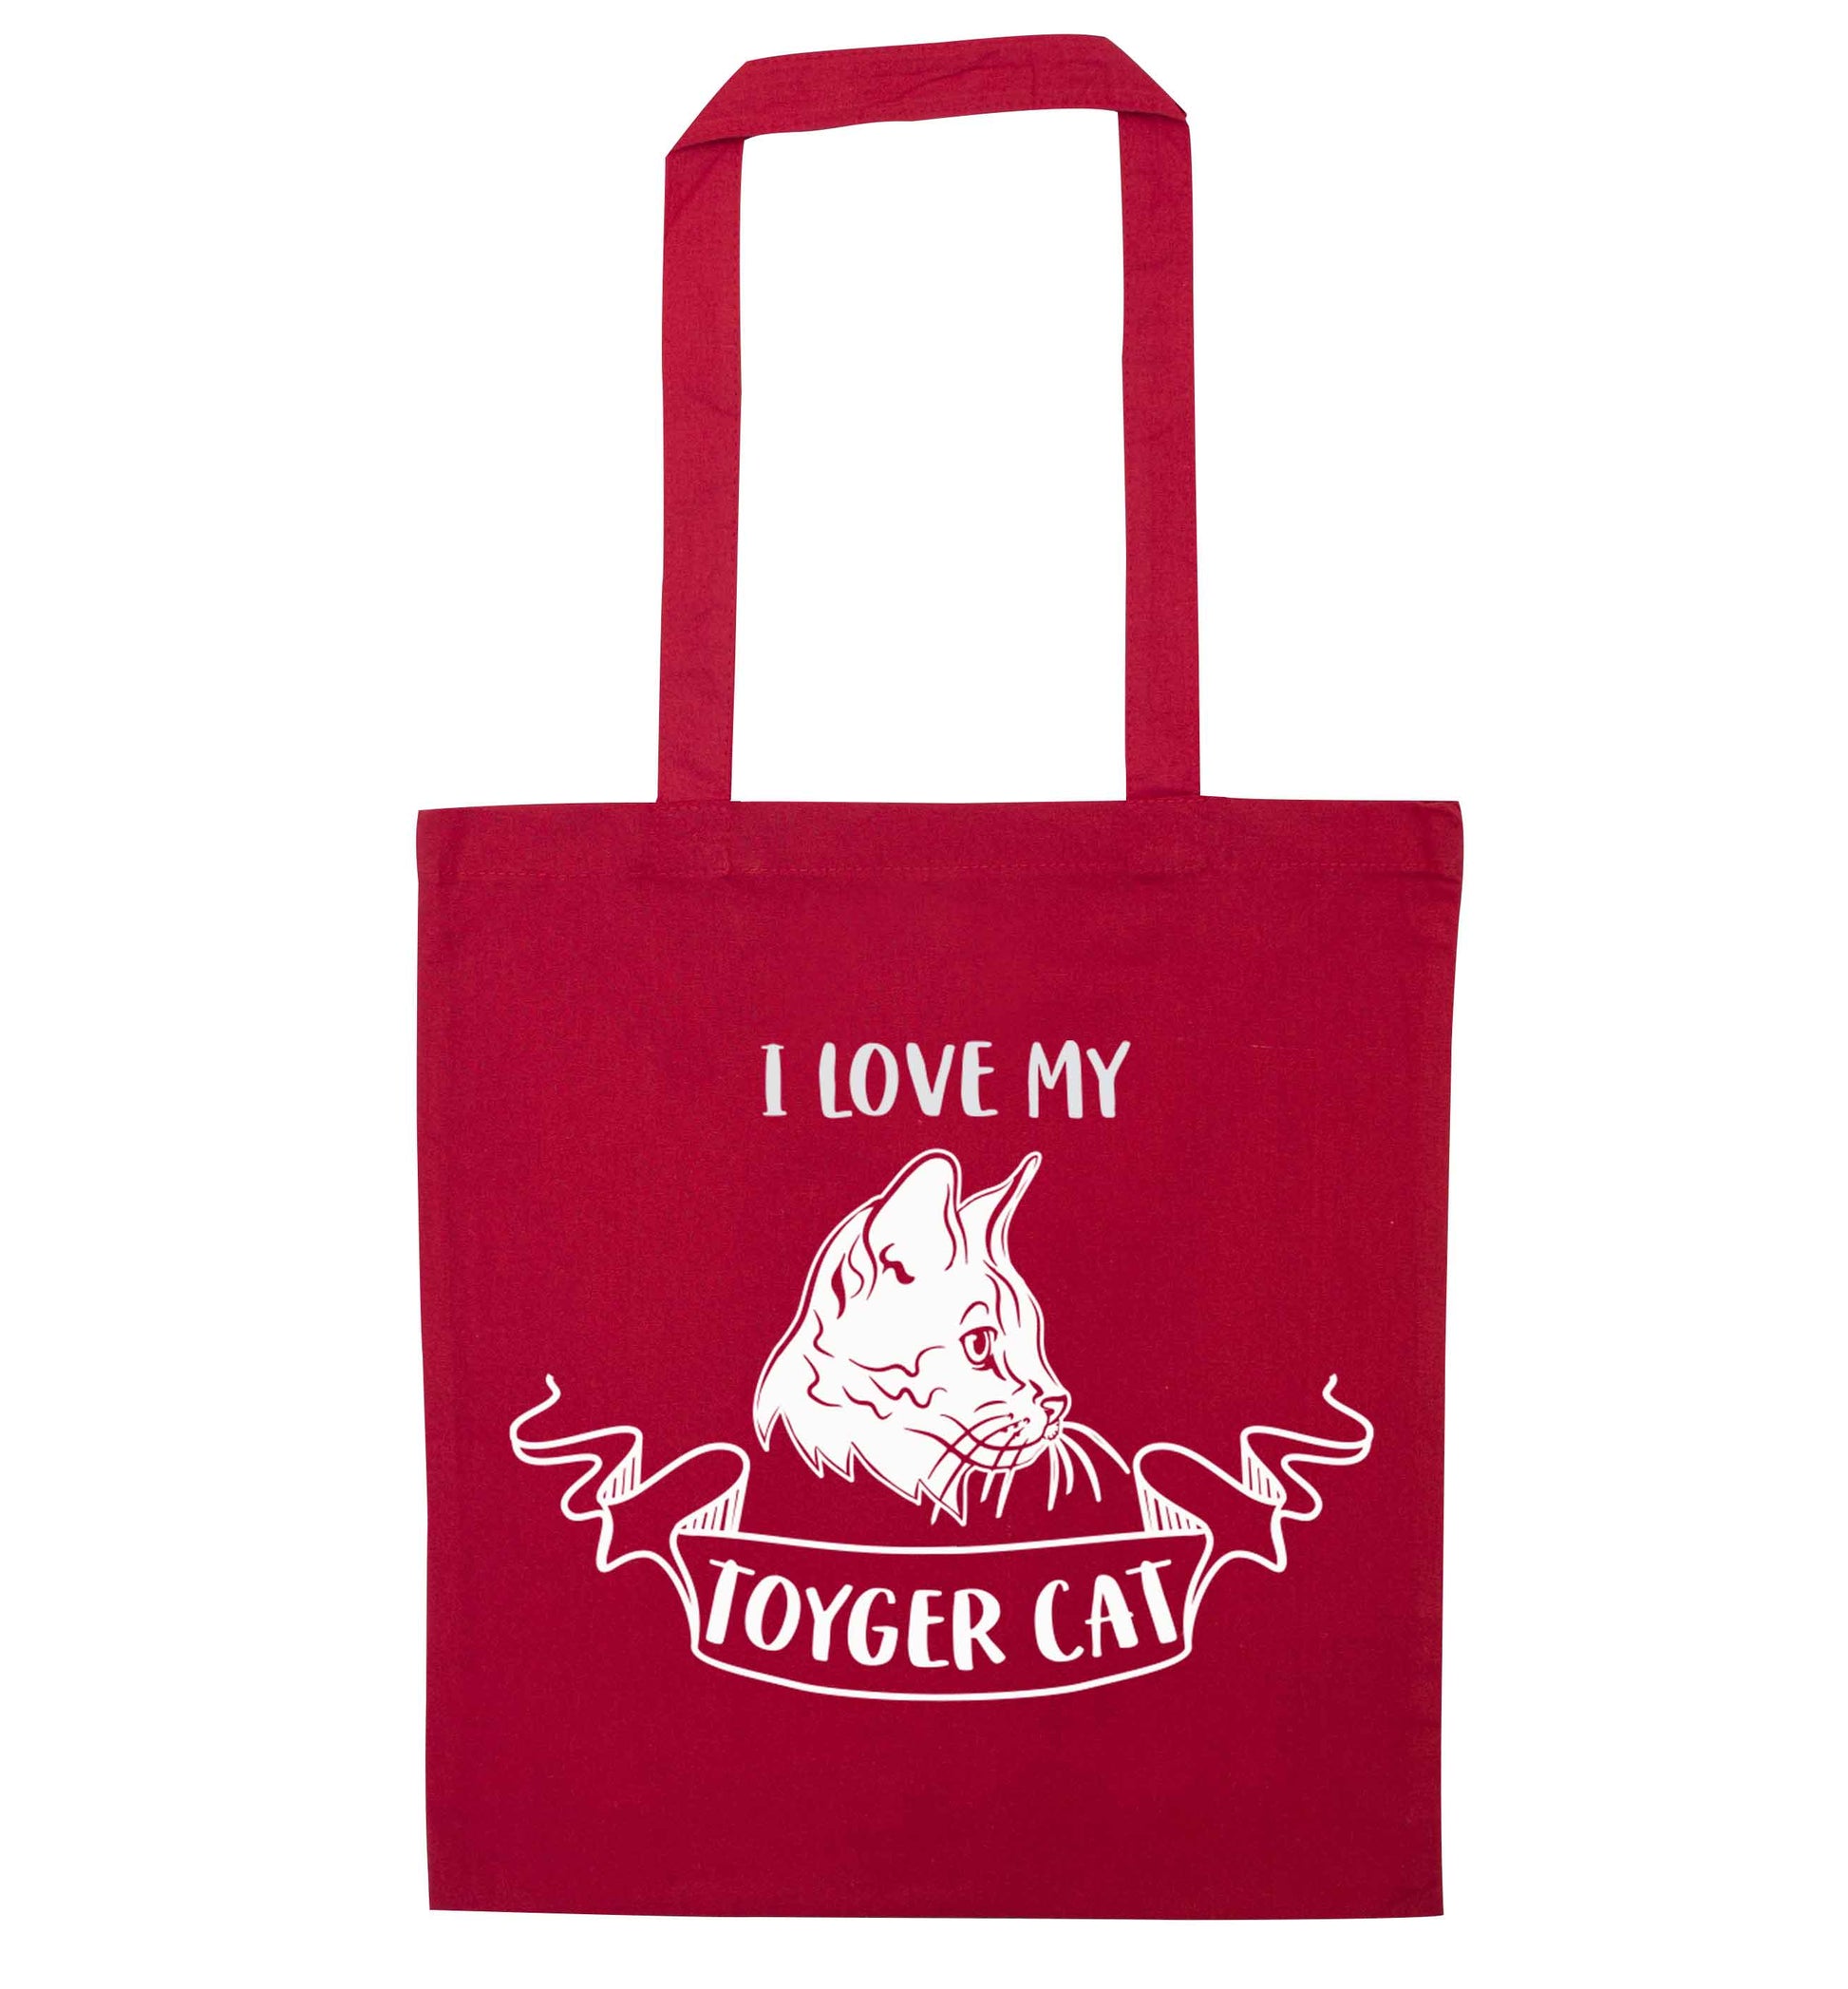 I love my toyger cat red tote bag